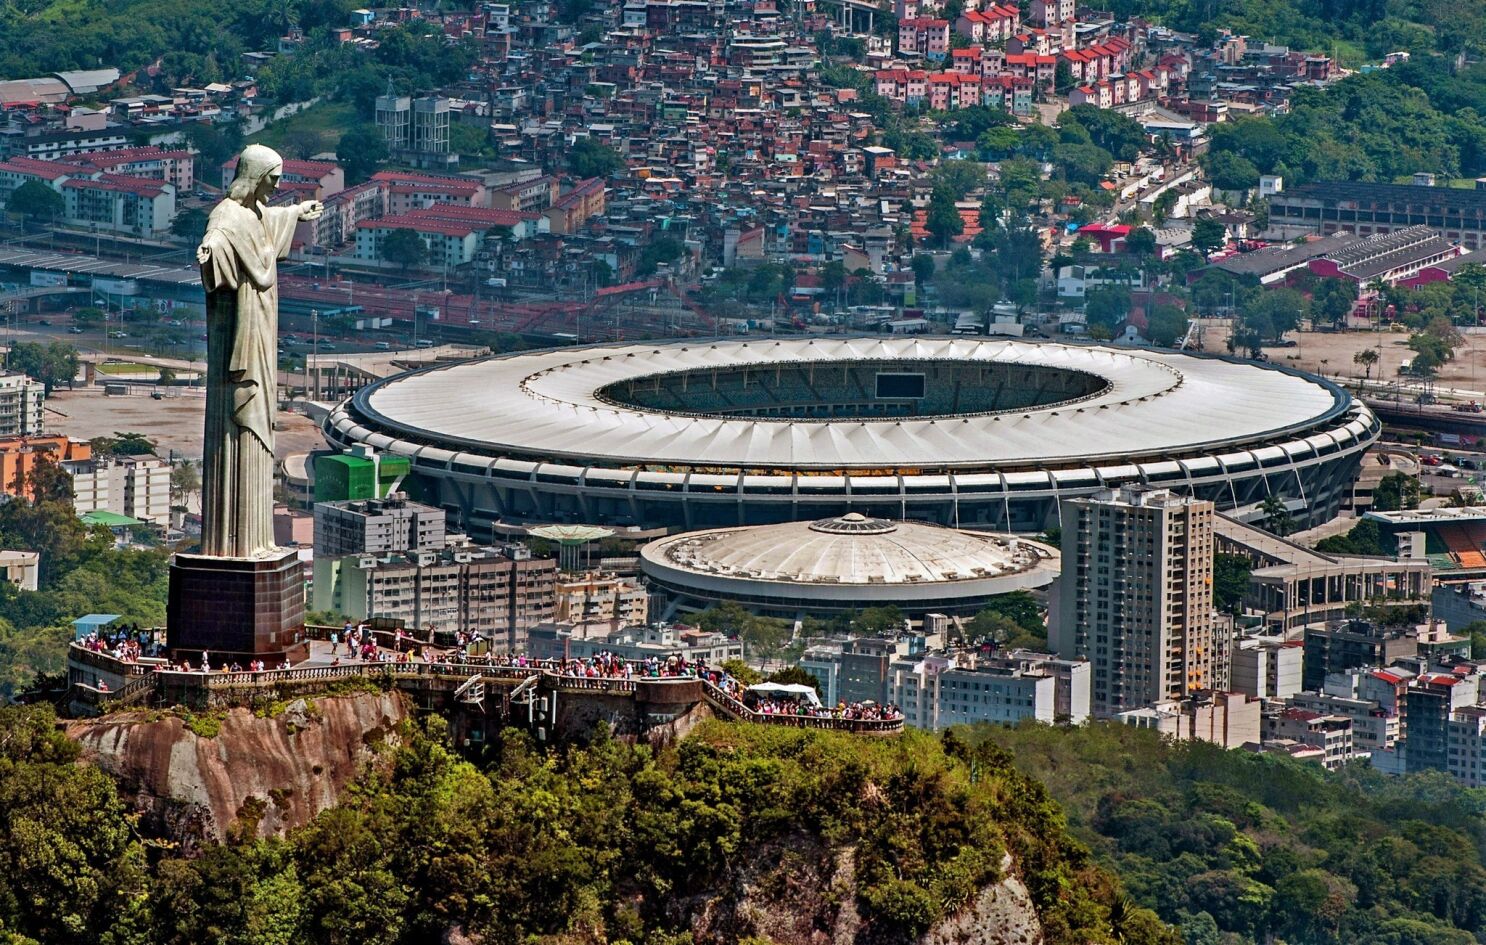 Brazil: For World Cup fans, plenty of other action in Rio de